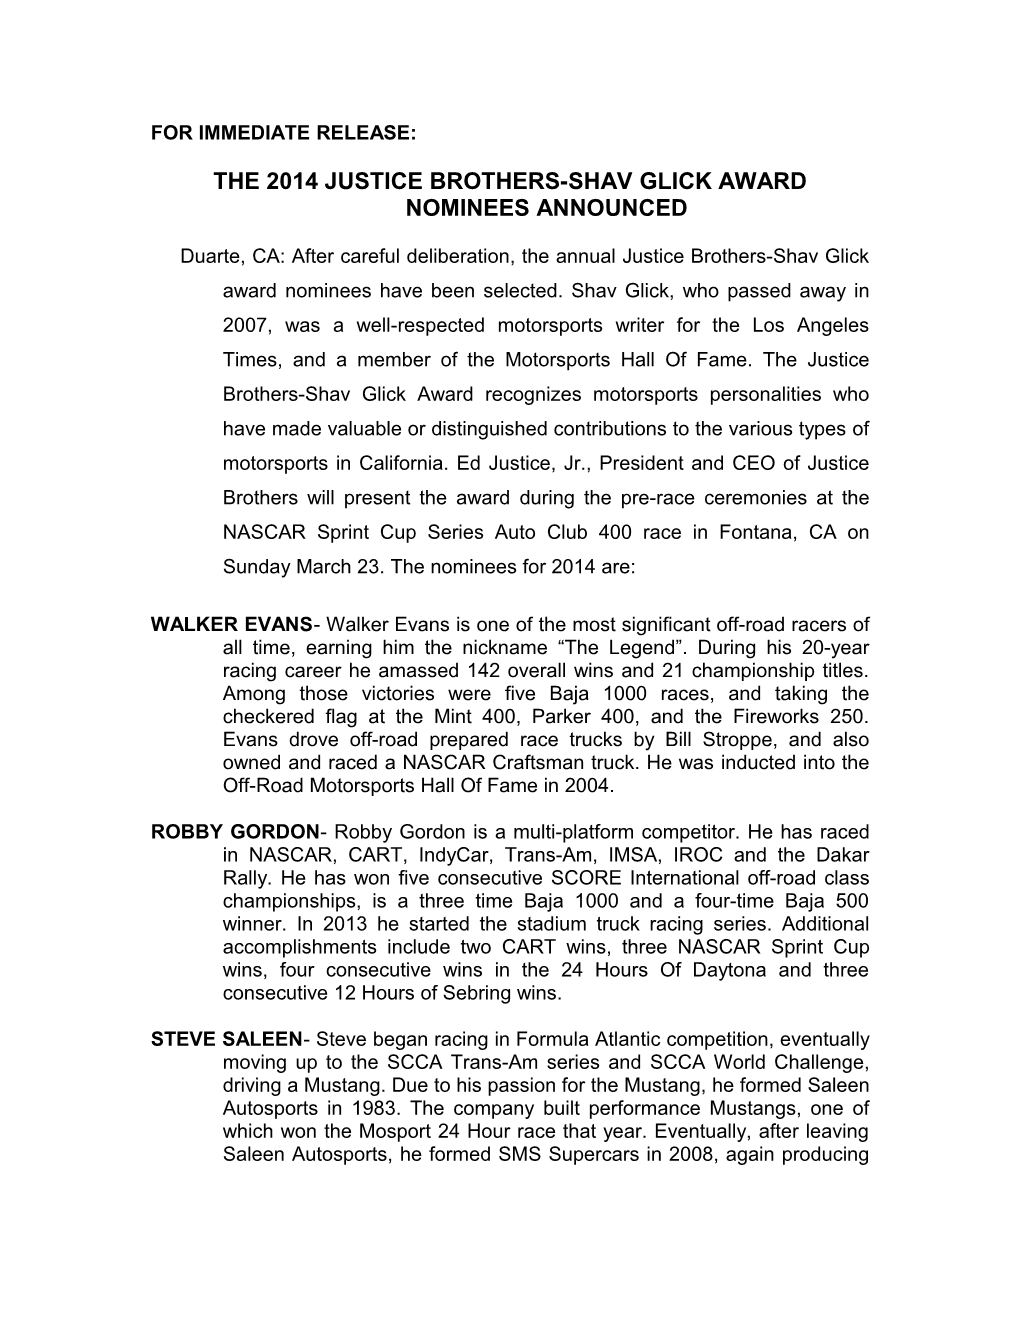 Duarte, CA: It S Time Again for the Annual Justice Brothers-Shav Glick Award Nominations